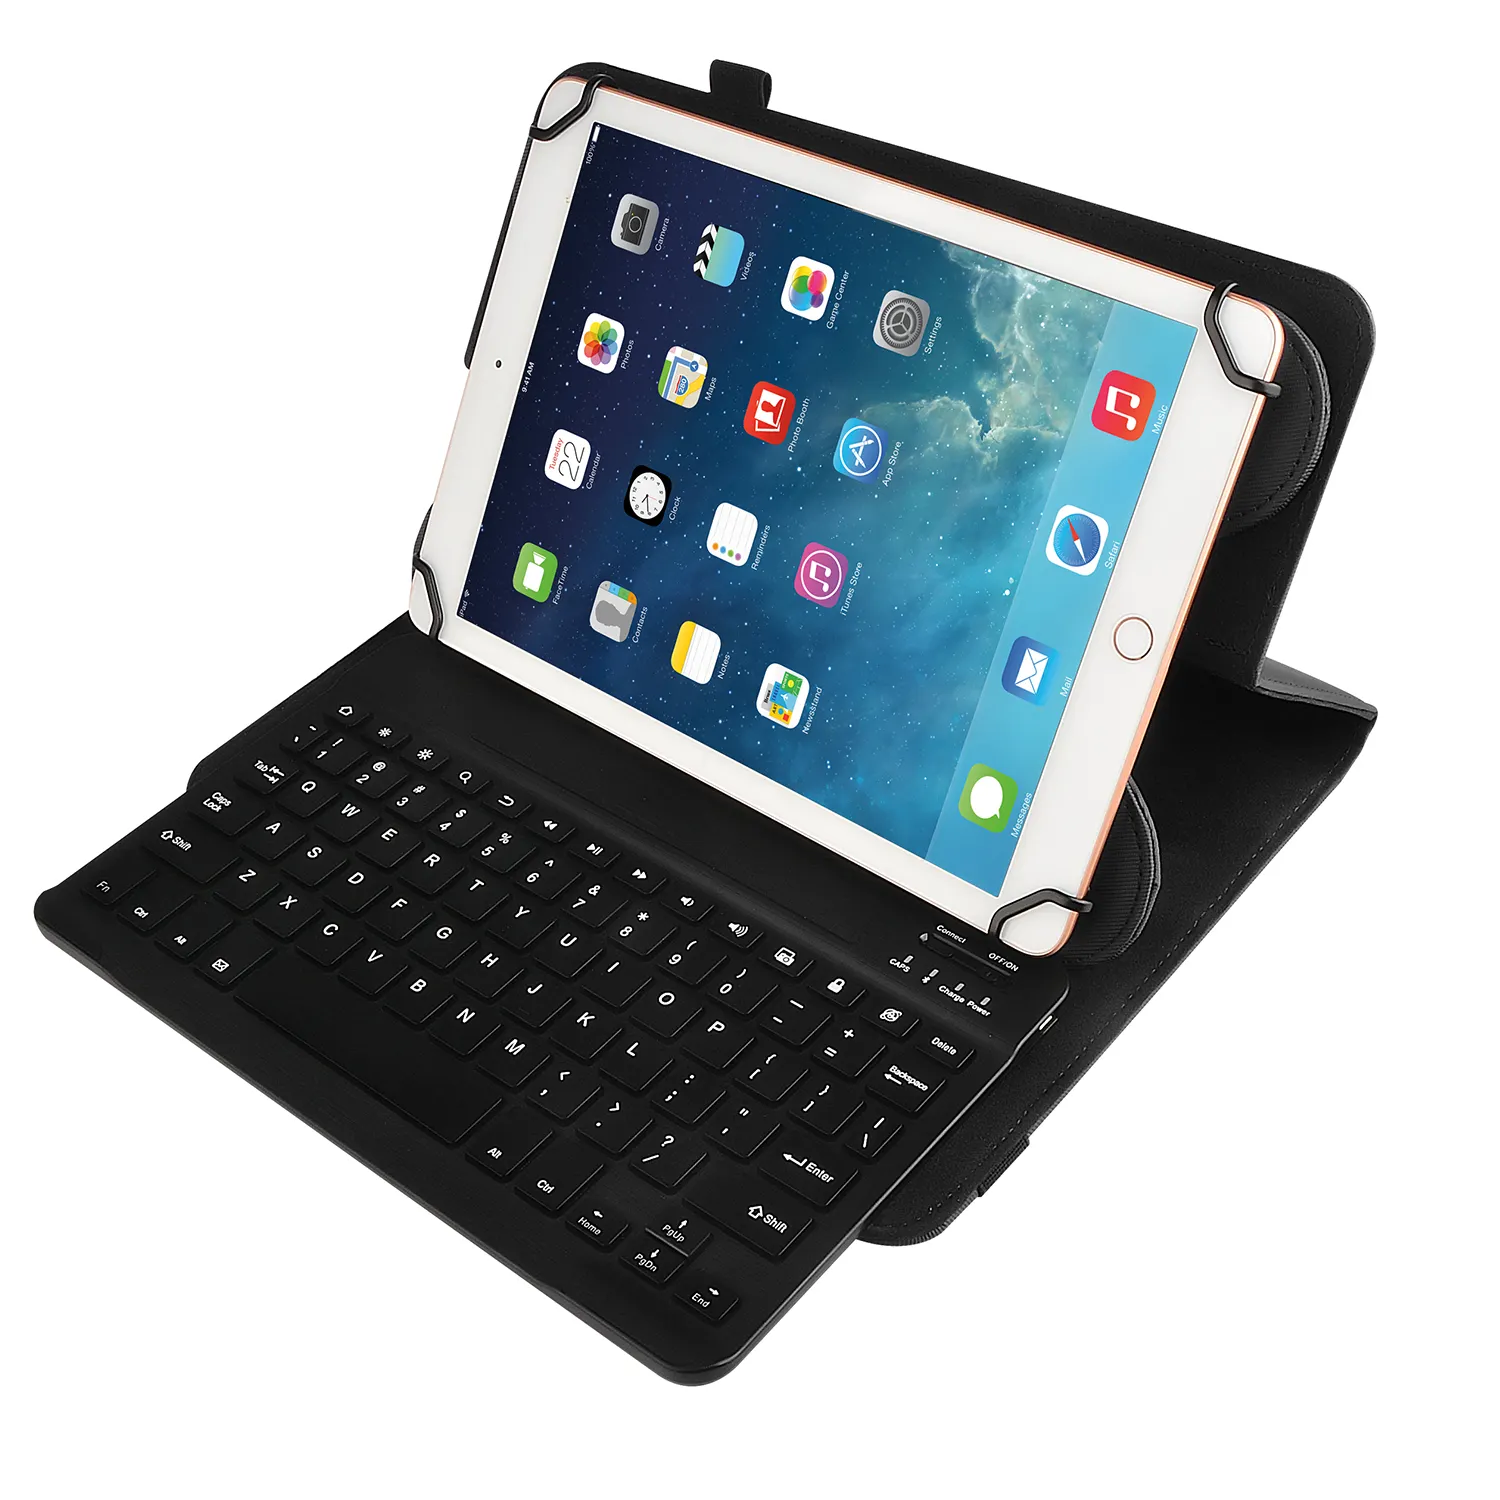 Shockproof PU leather fold universal case for tablet rotatable holder tablet cover for 7/8 inch tablet ipad case with keyboard